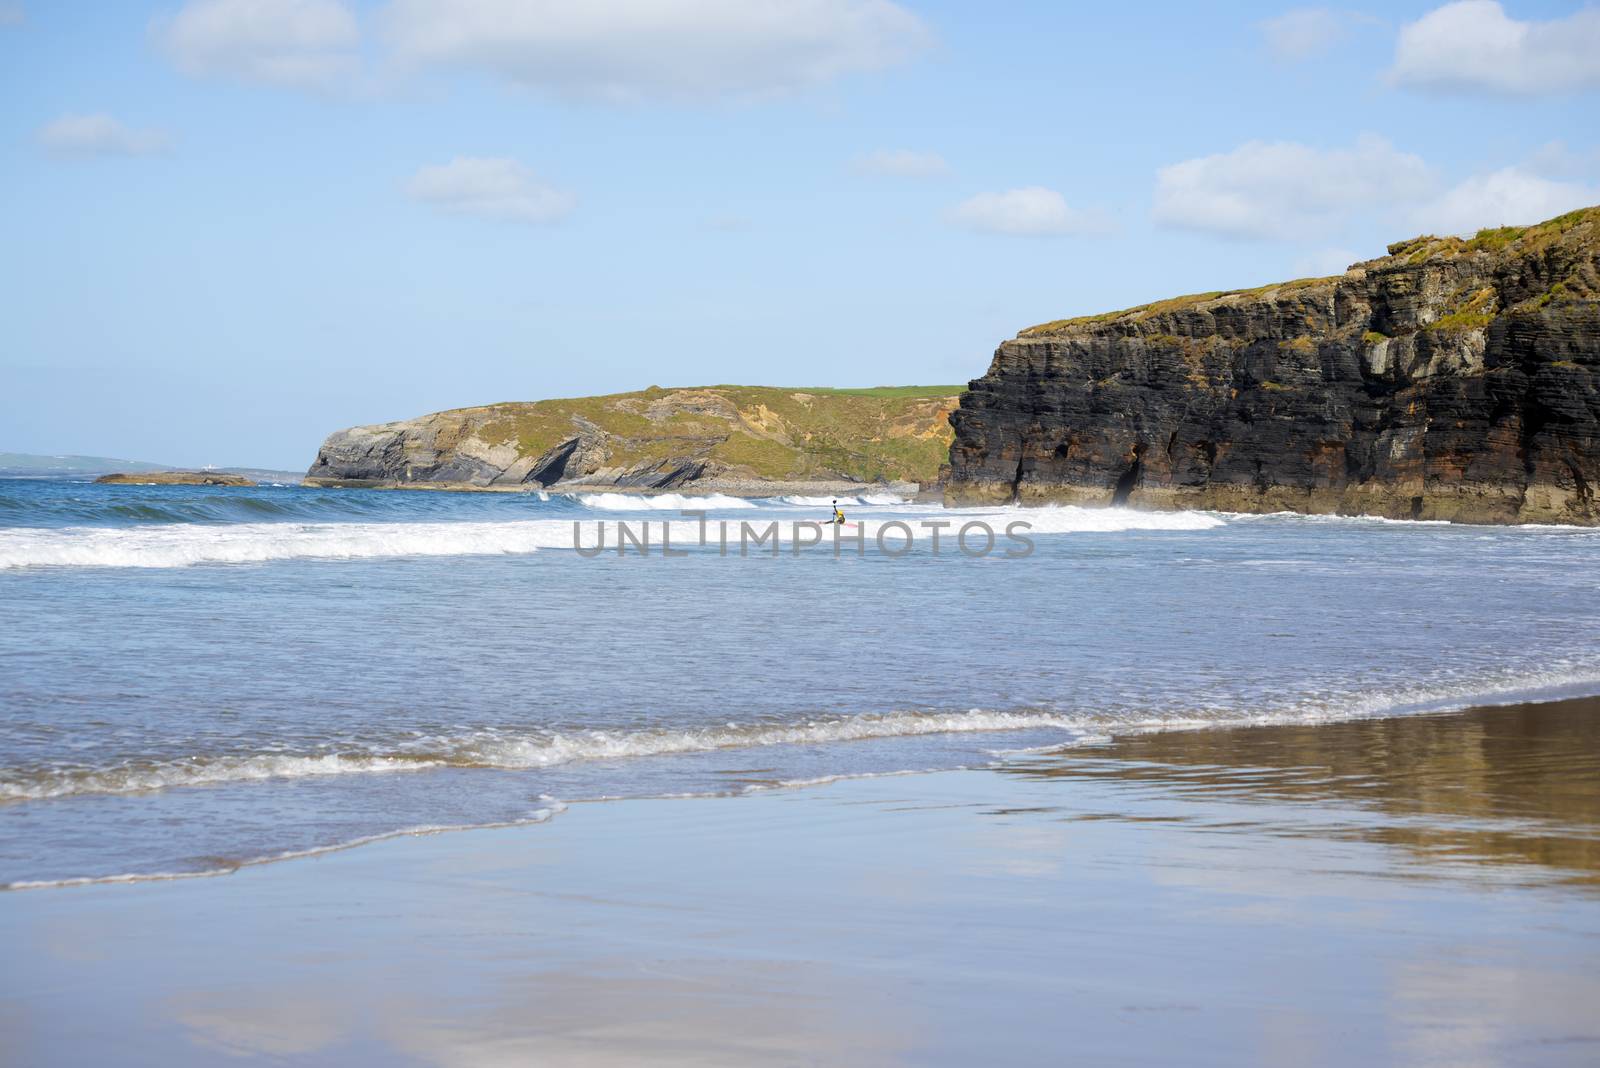 kayaker breaking waves at ballybunion by morrbyte